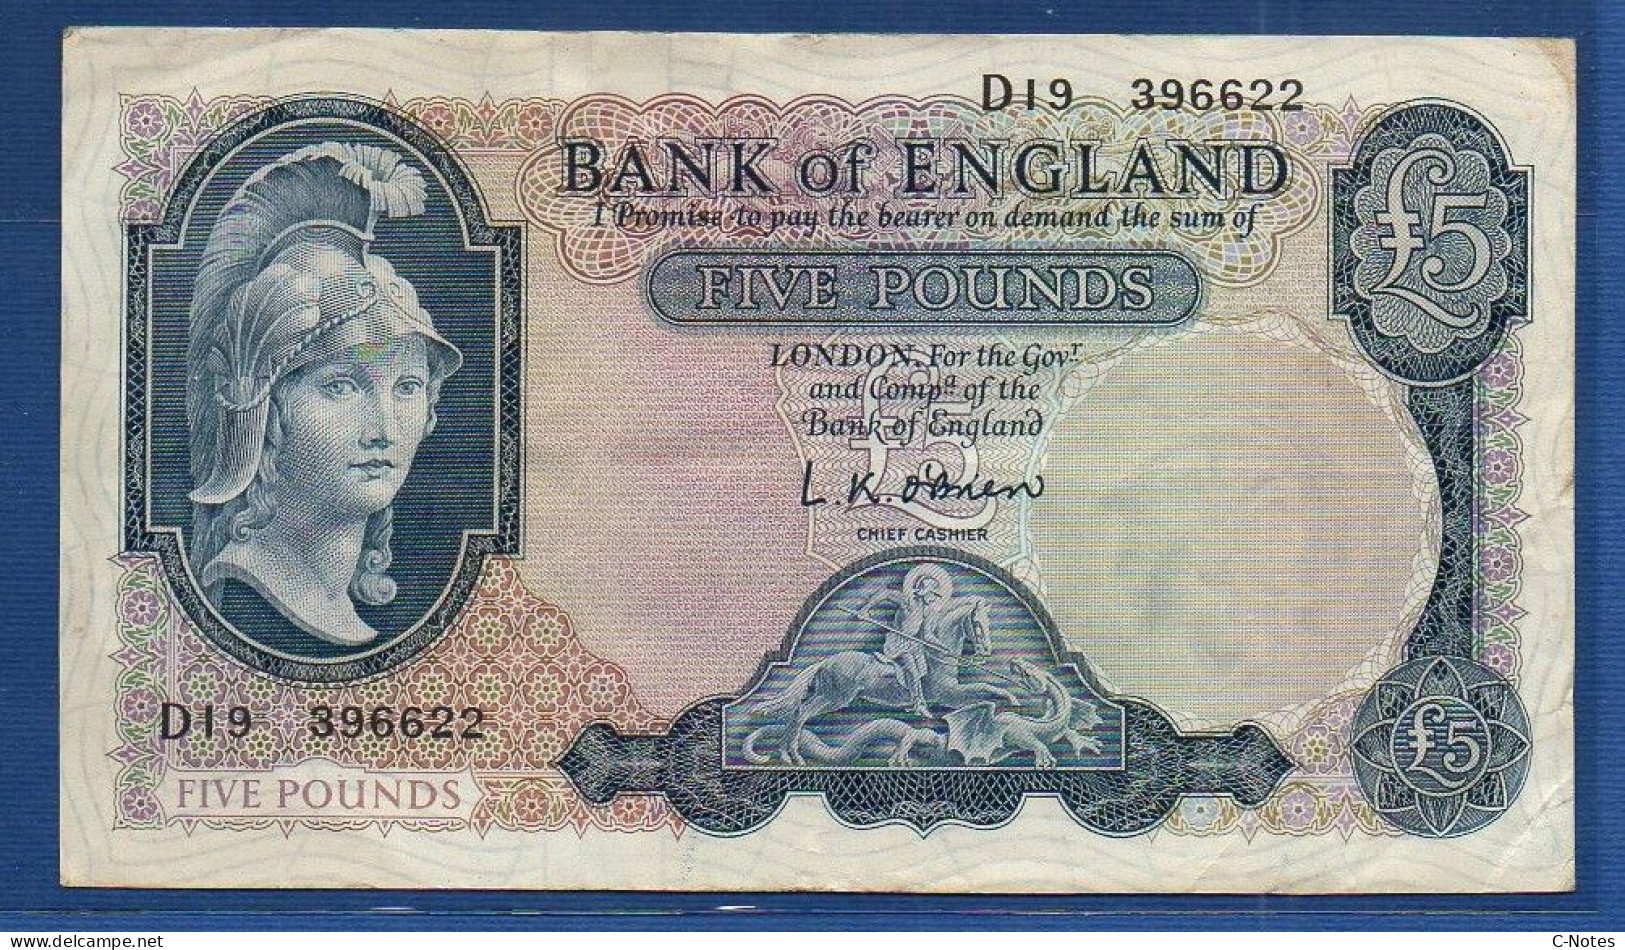 GREAT BRITAIN - P.371 – 5 Pounds ND (1957) VF,  S/n D19 396622 - 5 Pounds